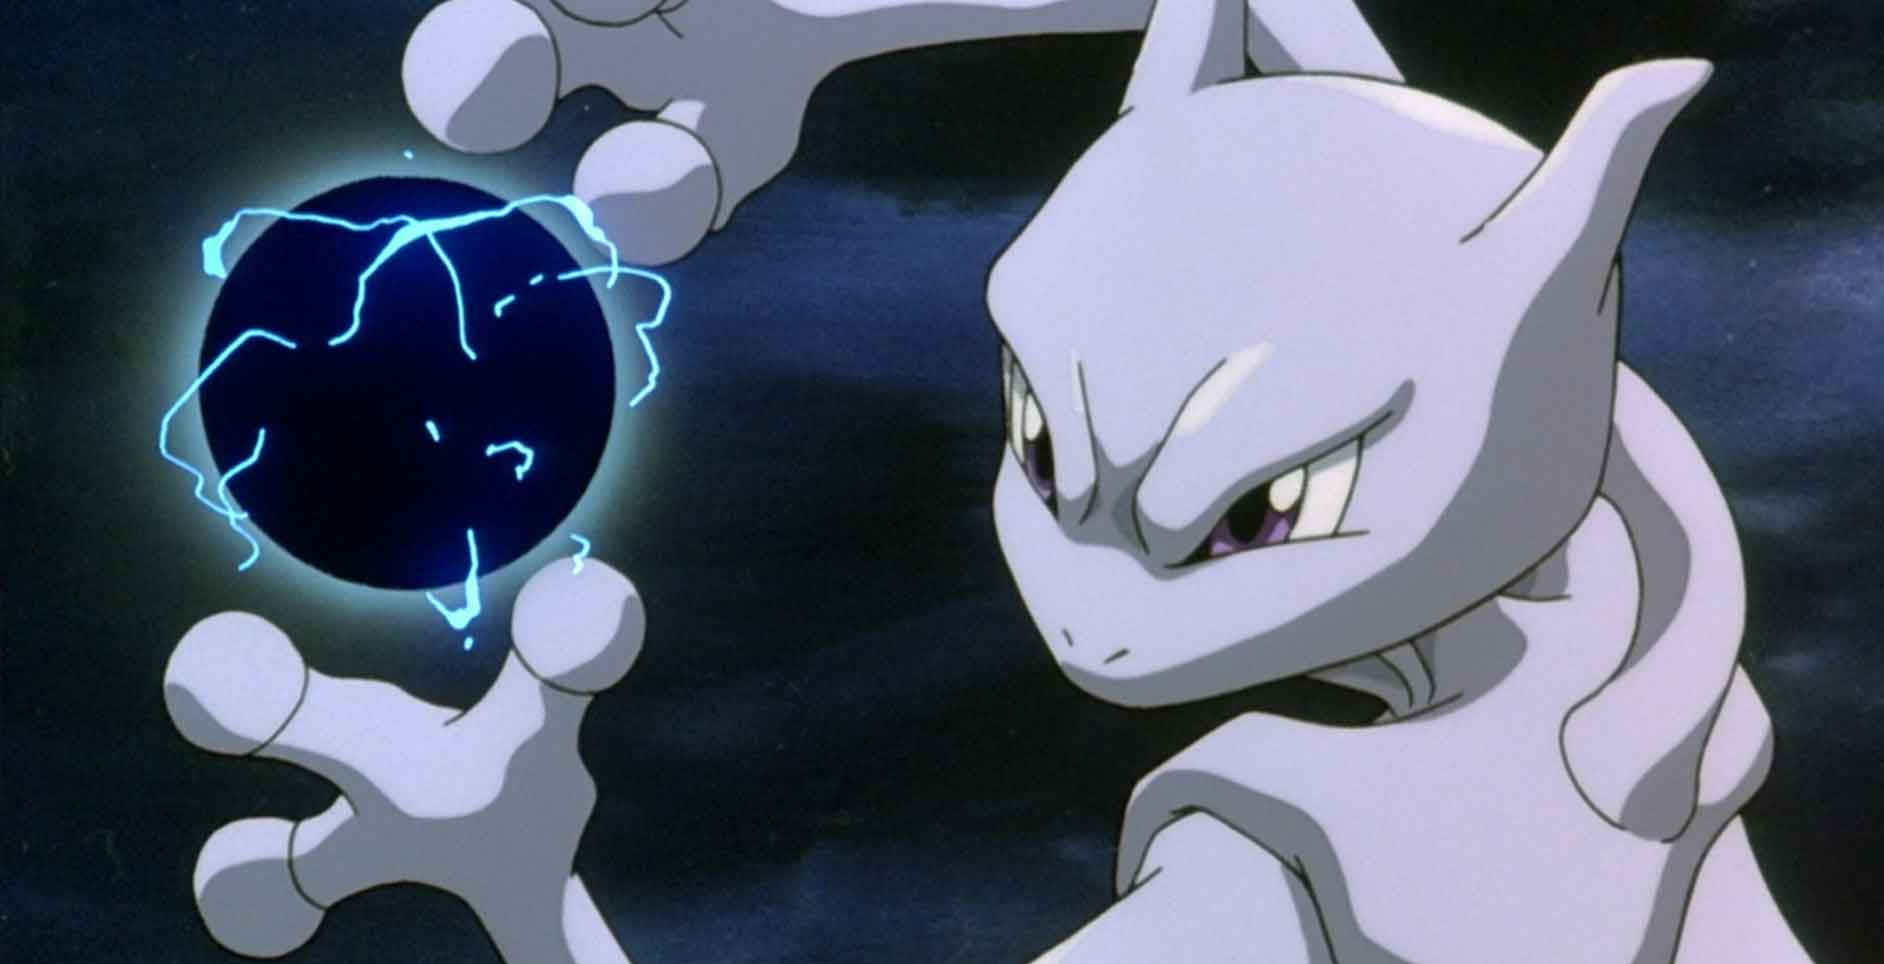 Pokemon Mewtwo Strikes Back Evolution is coming to Netflix this February